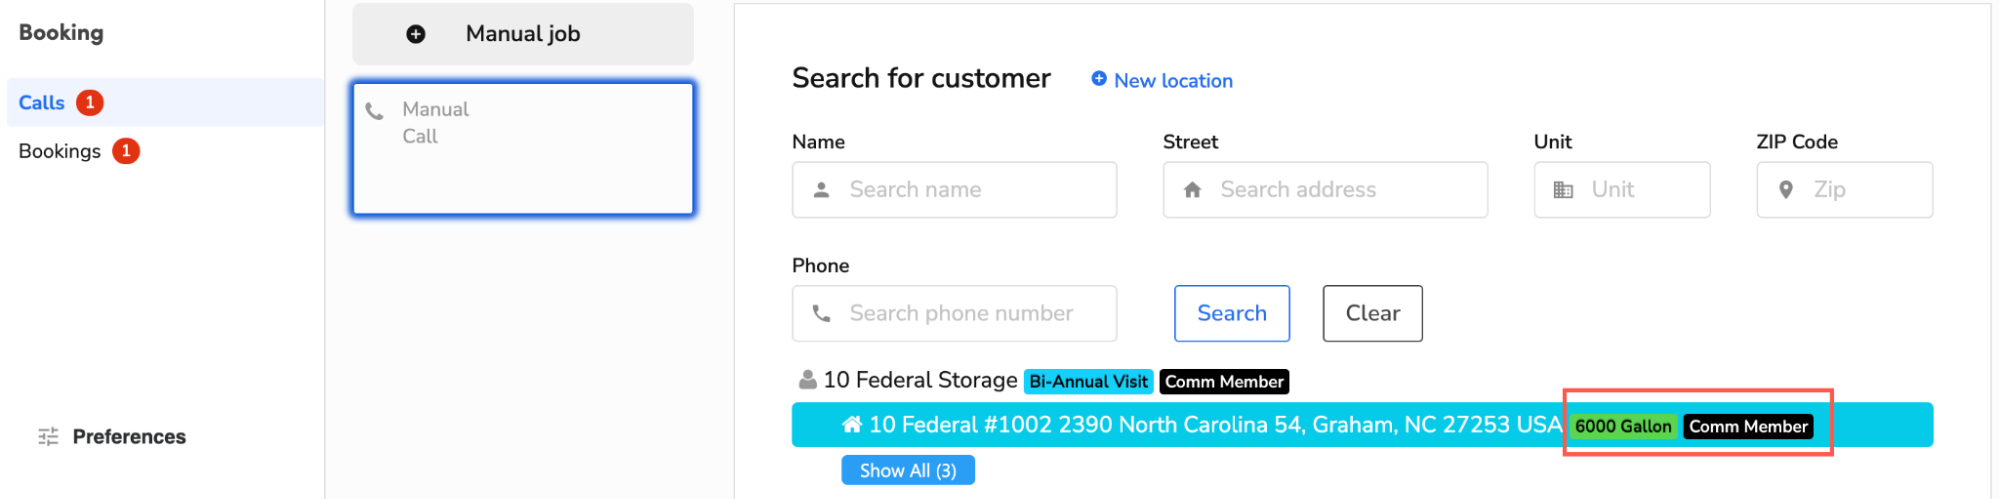 Previewing equipment tags on the customer's location in the Call booking screen